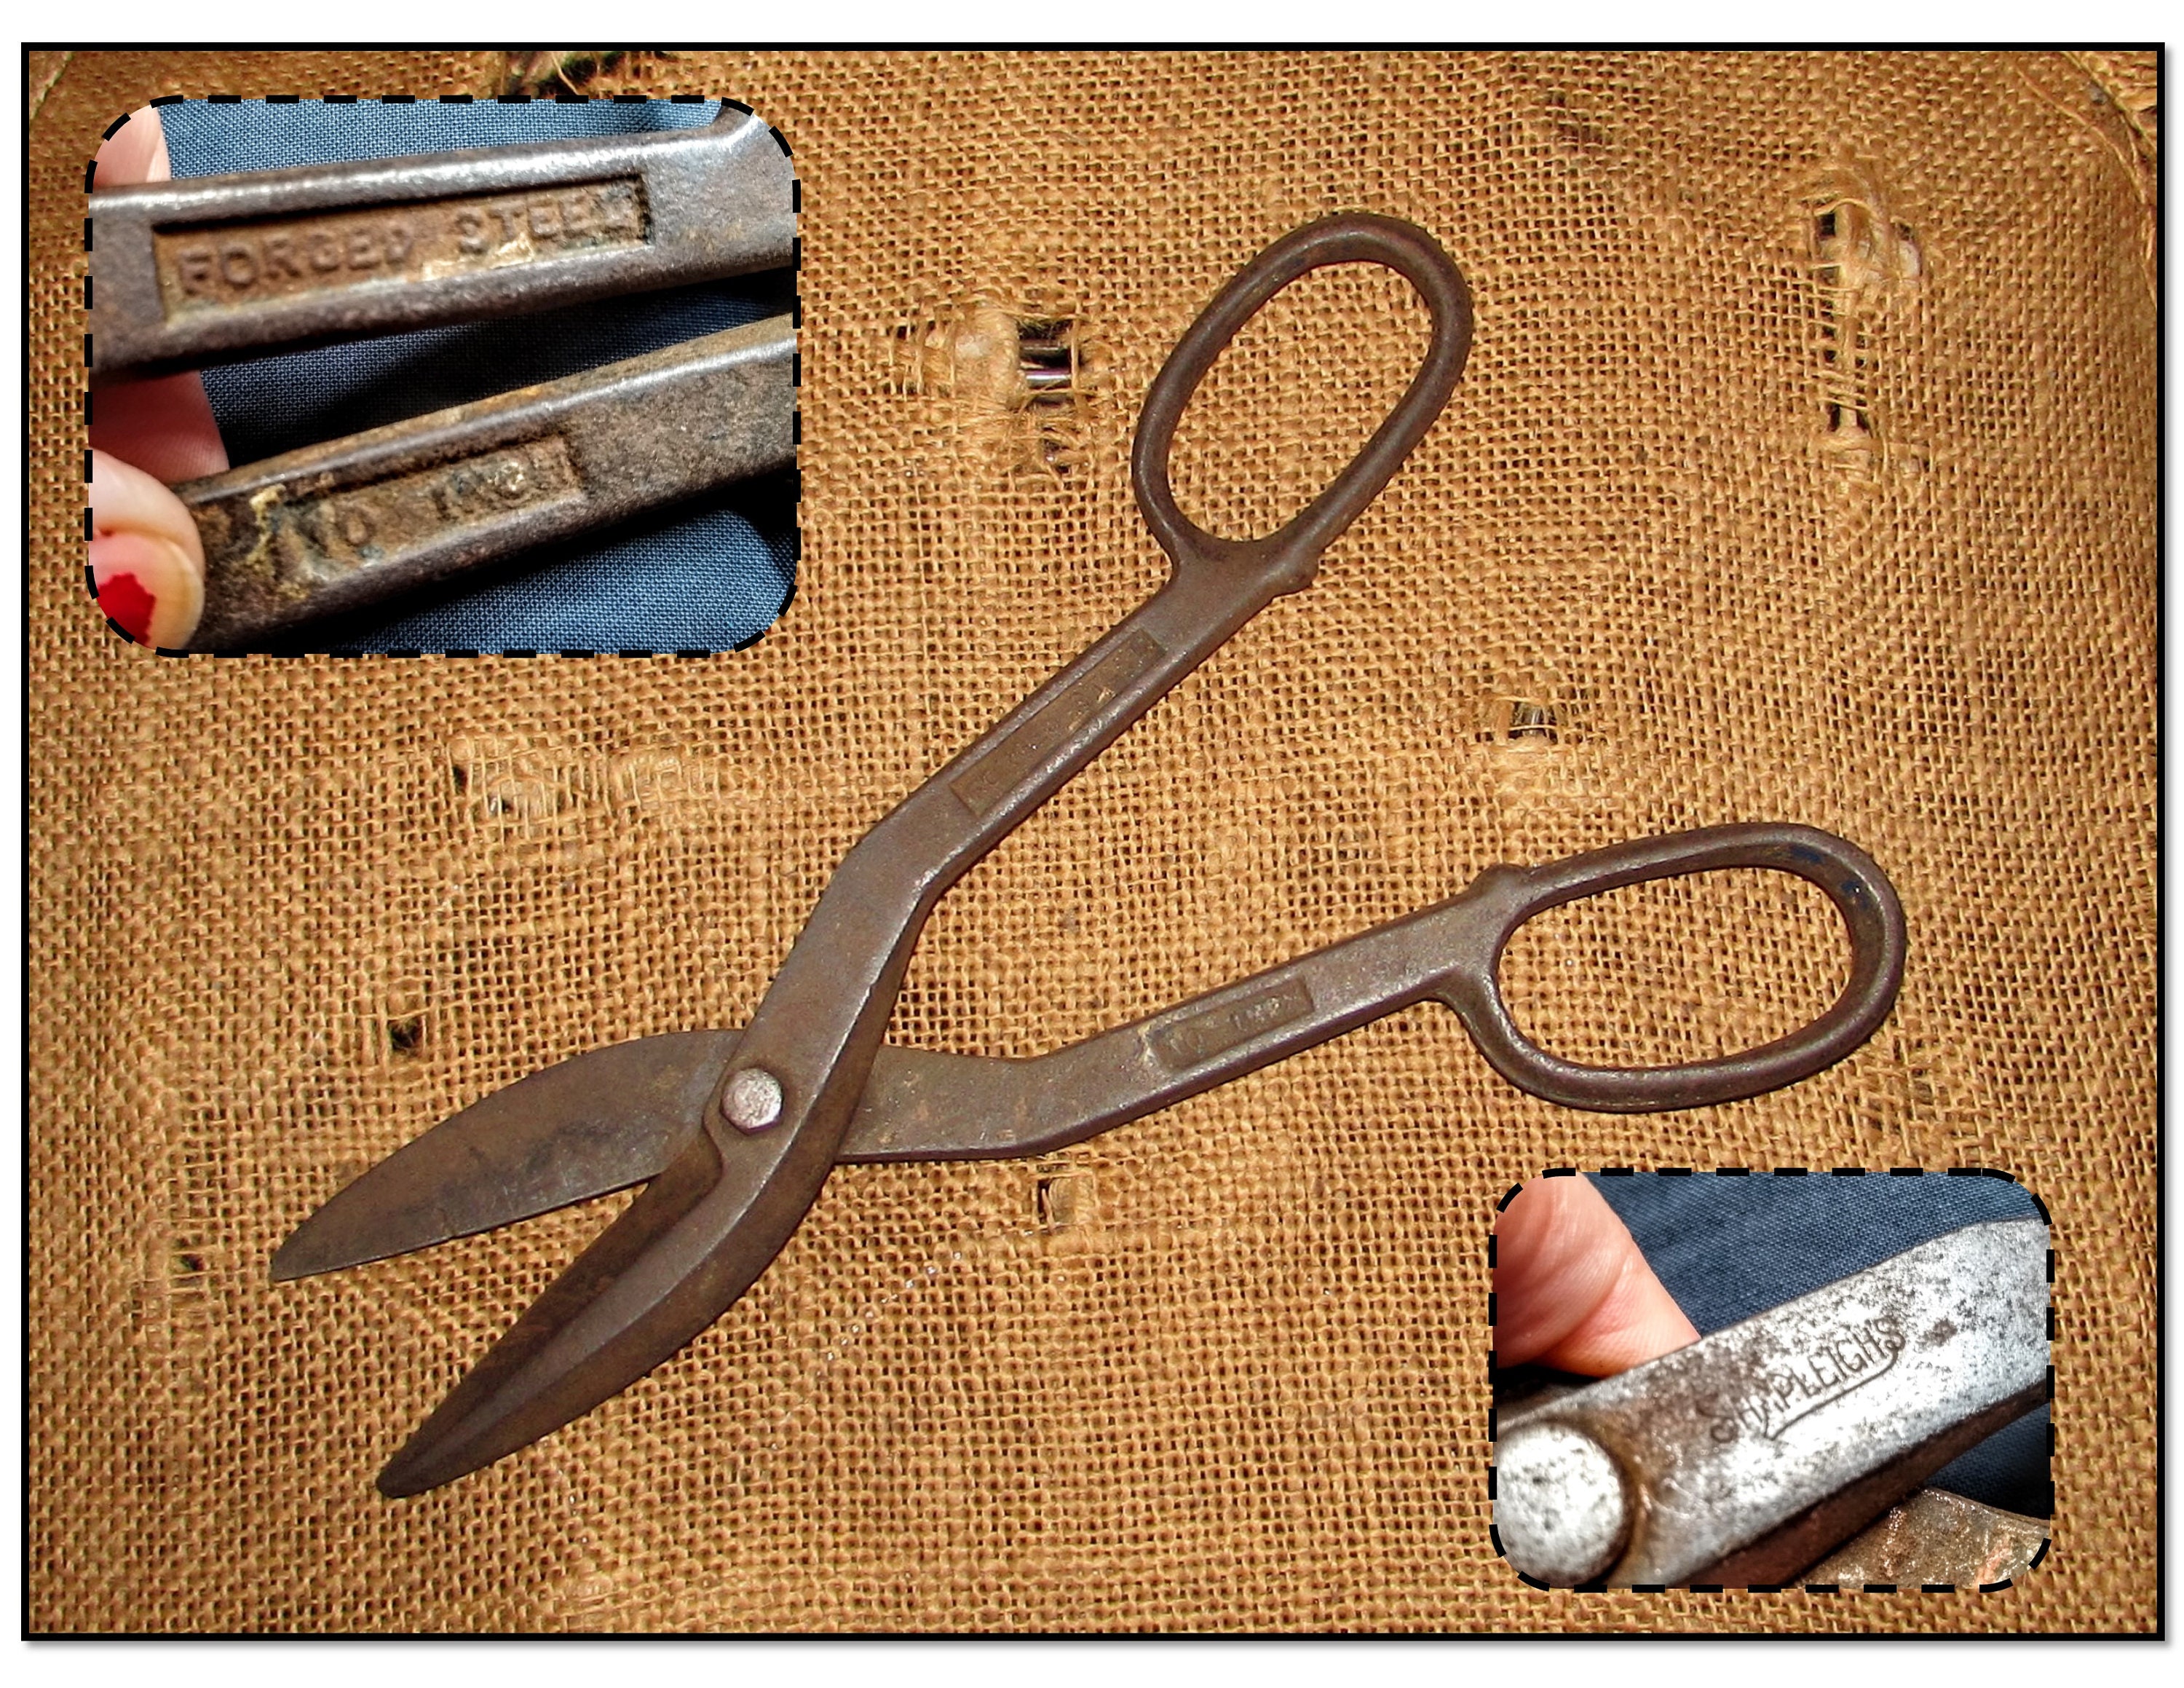 Vintage Scissors, Shears, and Snips